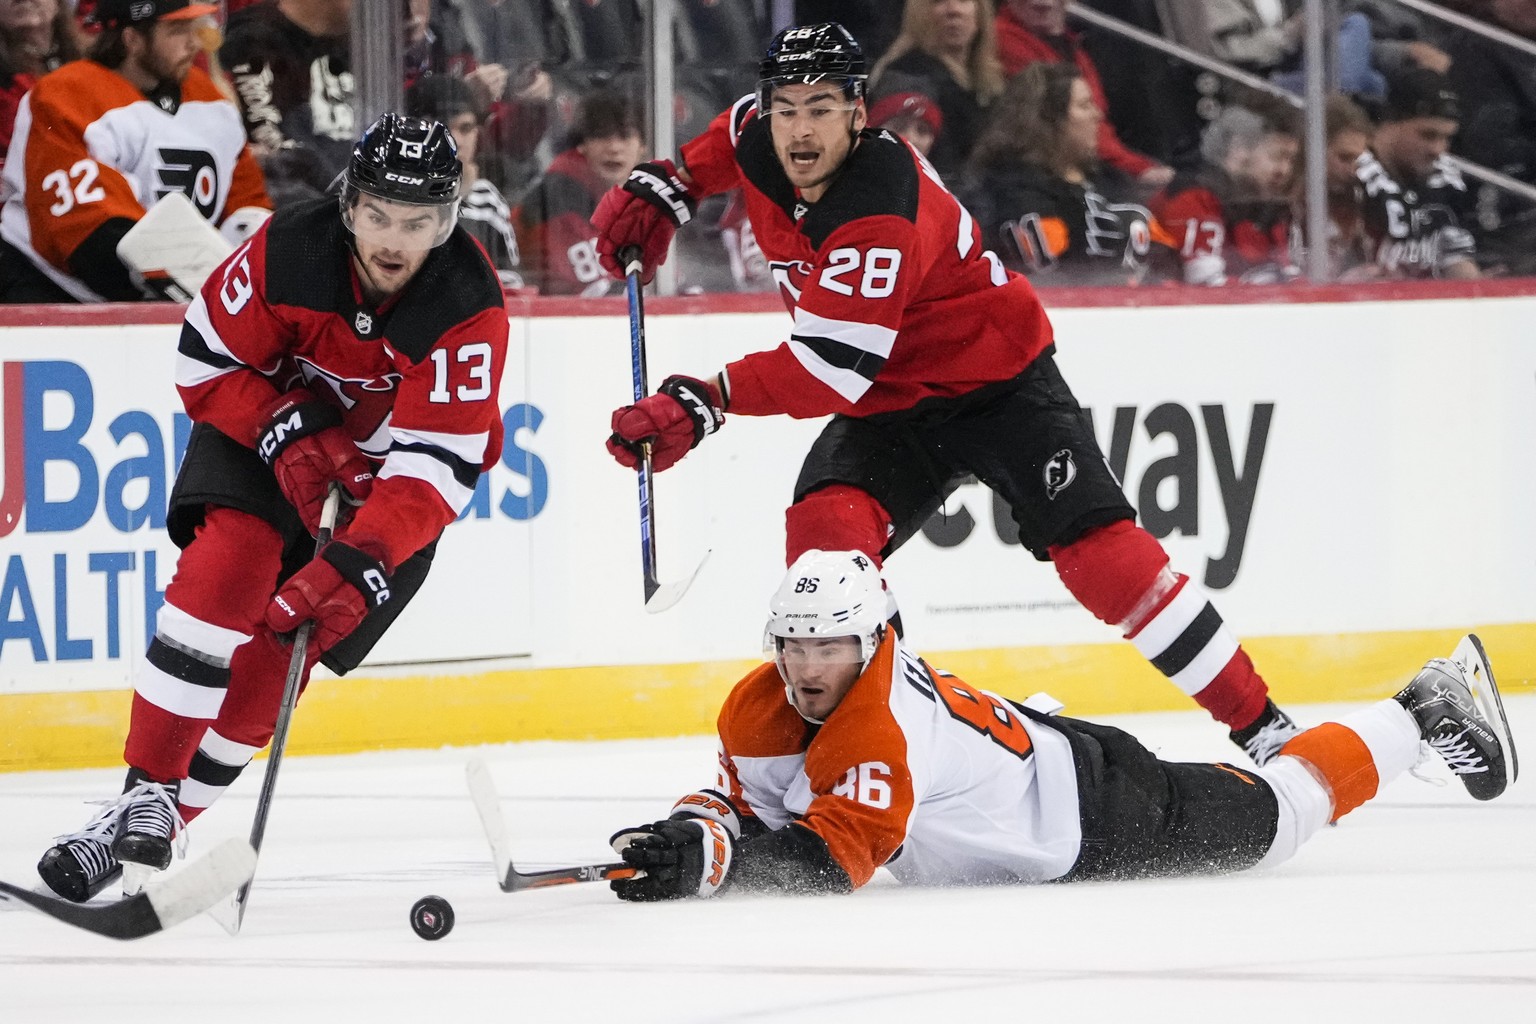 New Jersey Devils&#039; Nico Hischier (13) drives past Philadelphia Flyers&#039; Joel Farabee (86) as Devils&#039; Timo Meier (28) watches during the second period of a preseason NHL hockey game, Mond ...